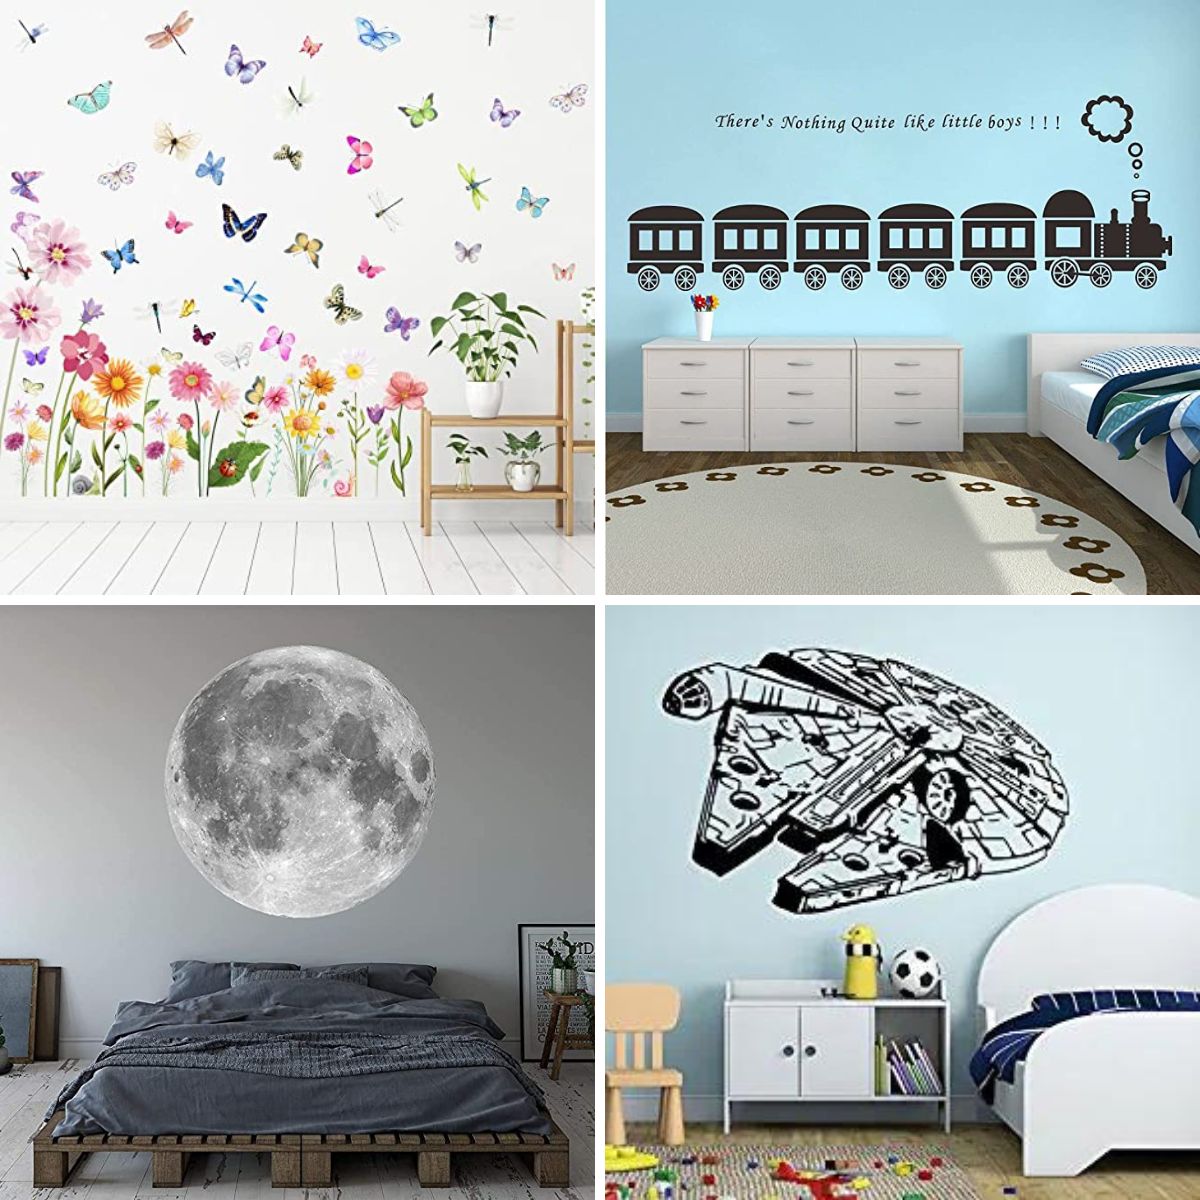 4 images of wall decor for your kids.